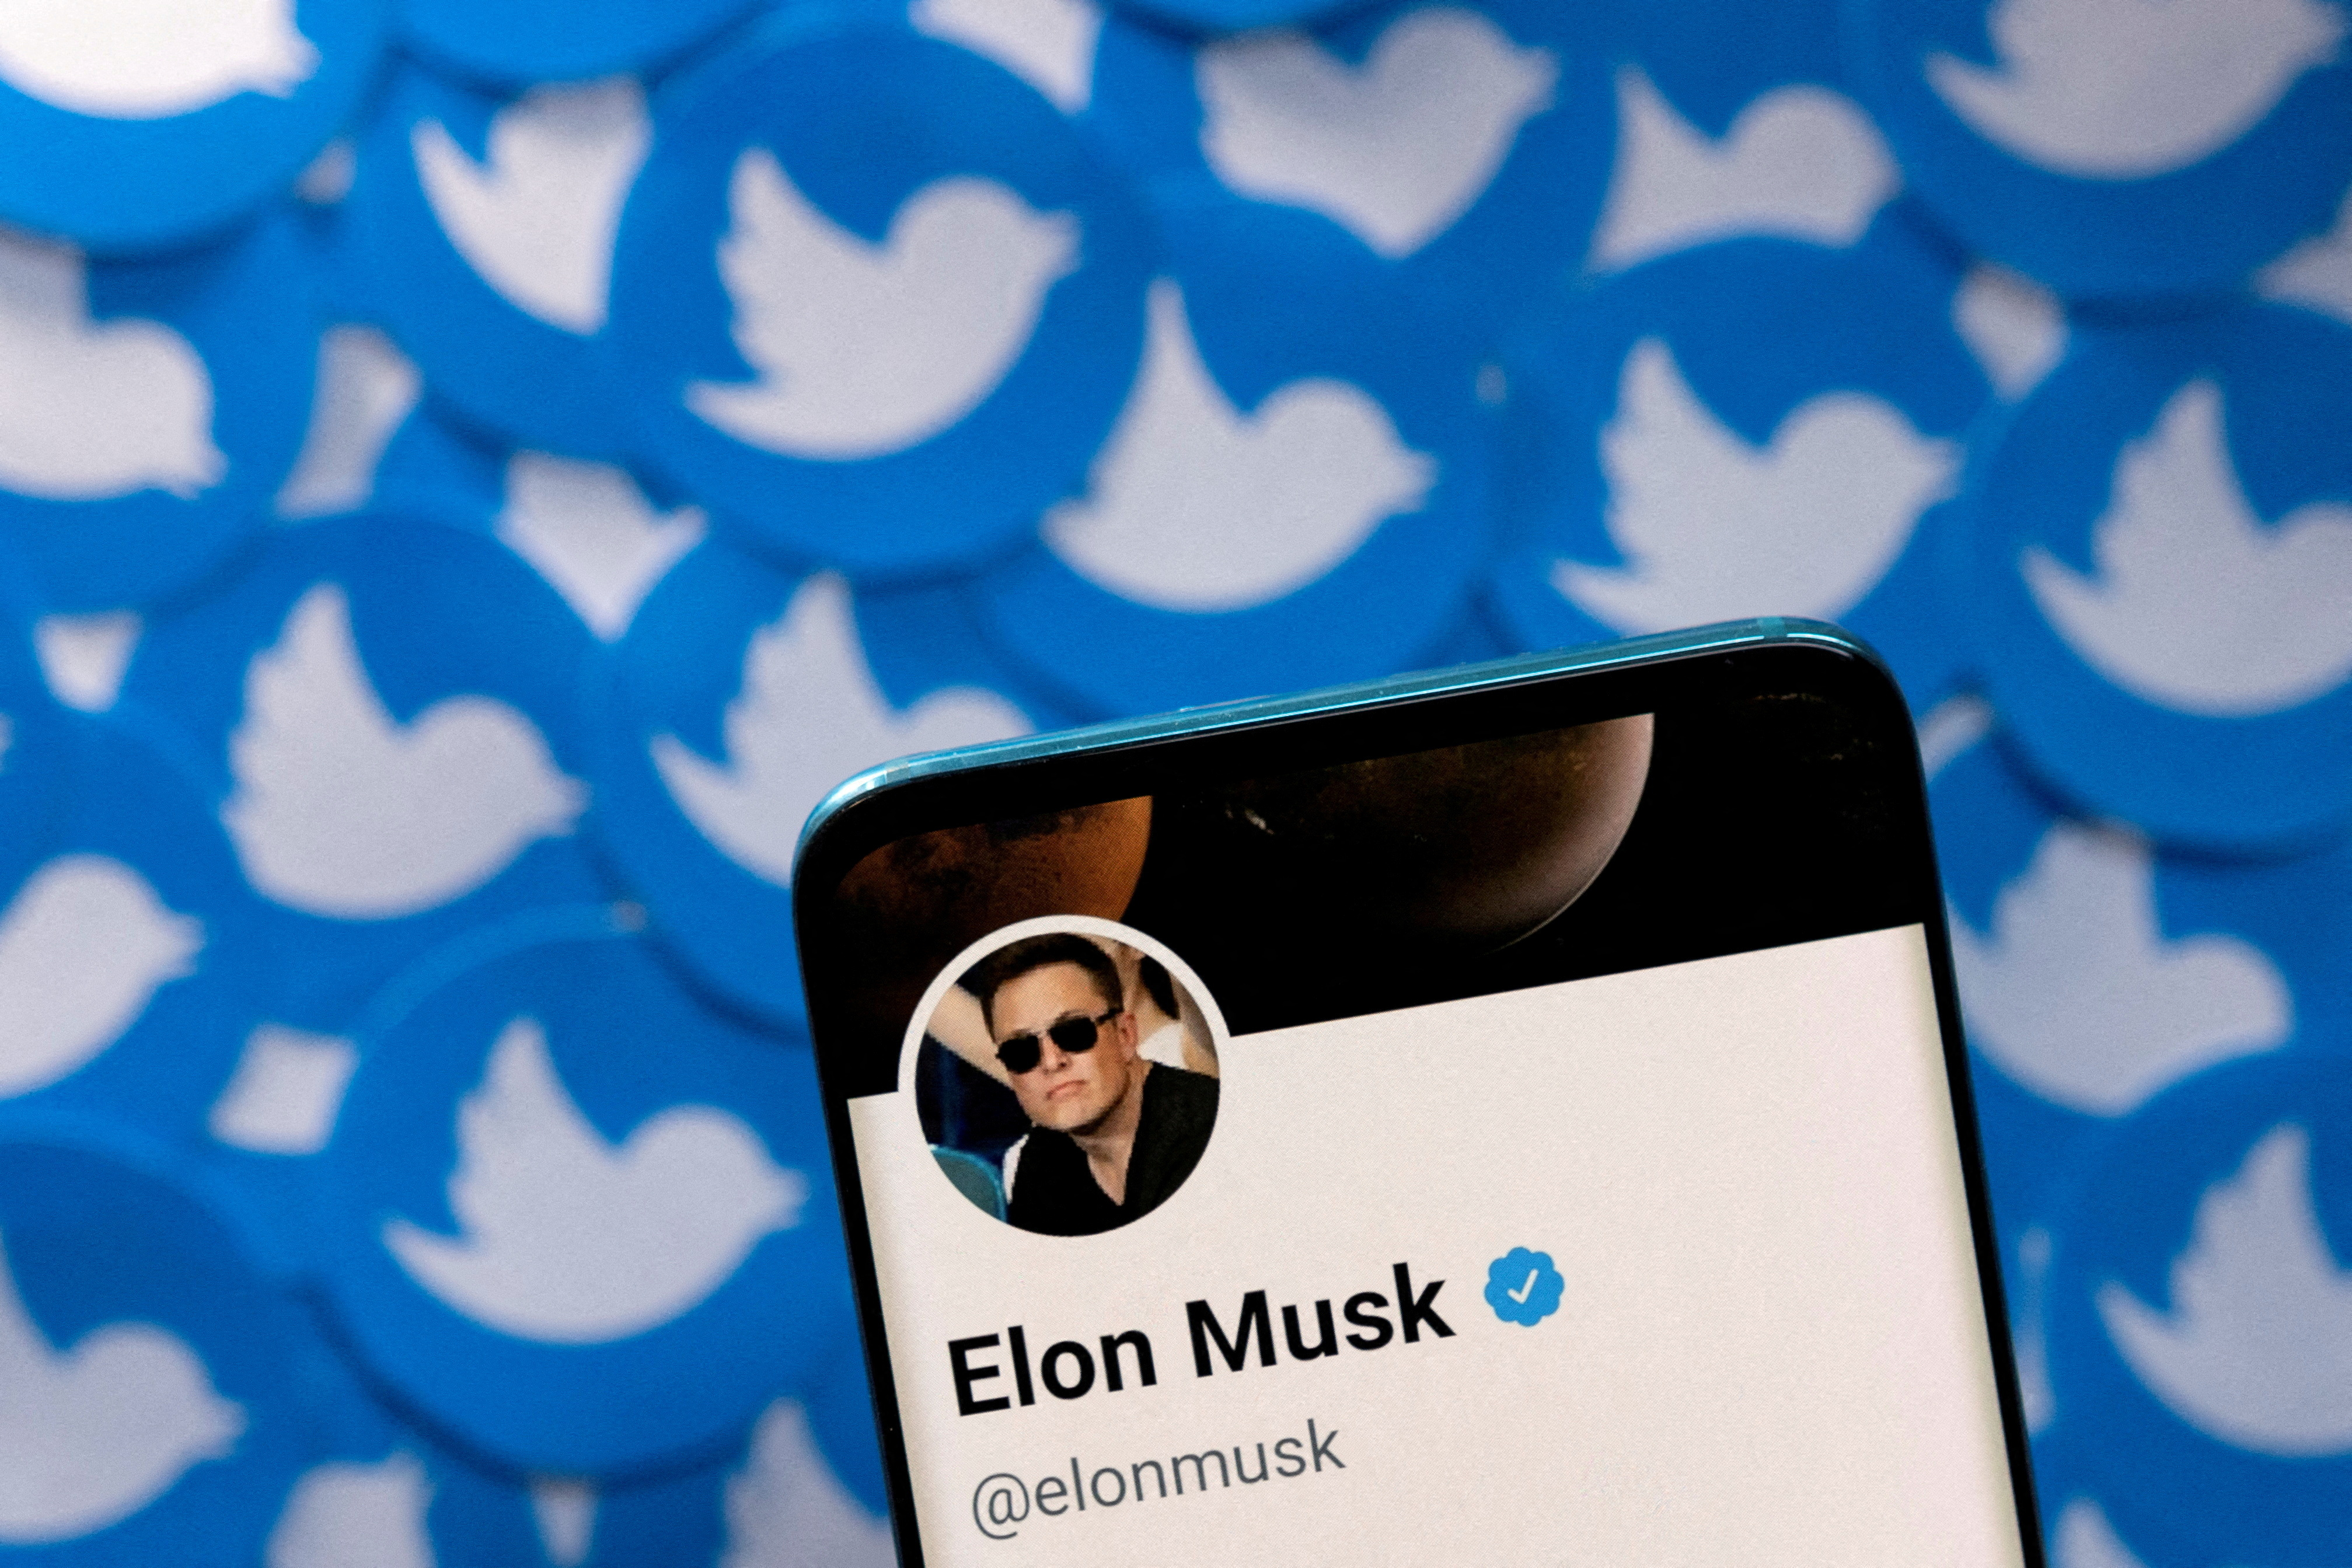 The image shows Elon Musk's Twitter profile on a smartphone and printed Twitter logos